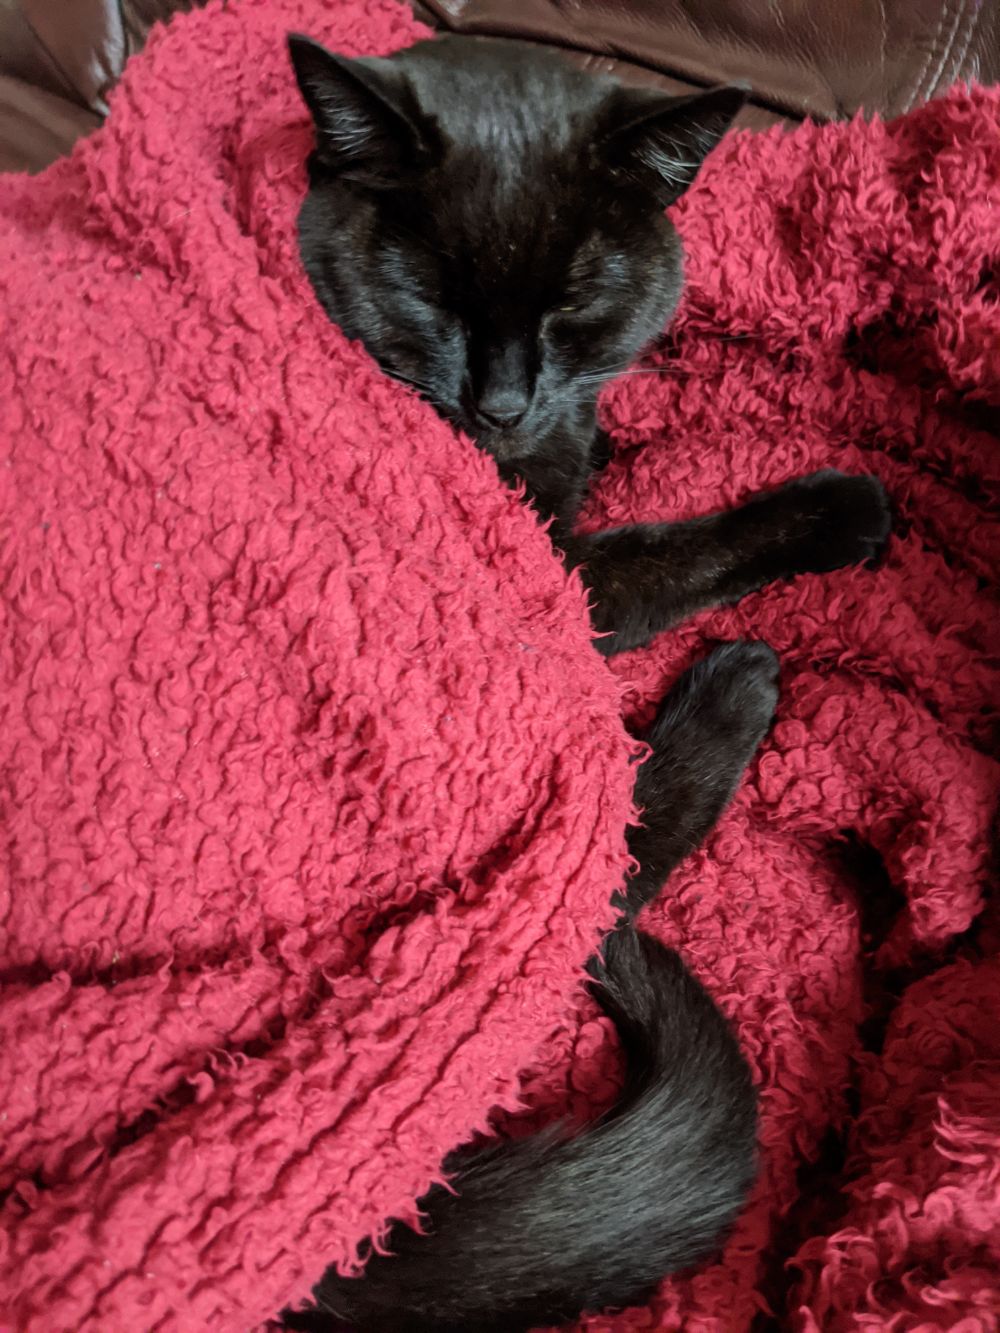 Black cat sitting up slightly, wrapped in a red blanket